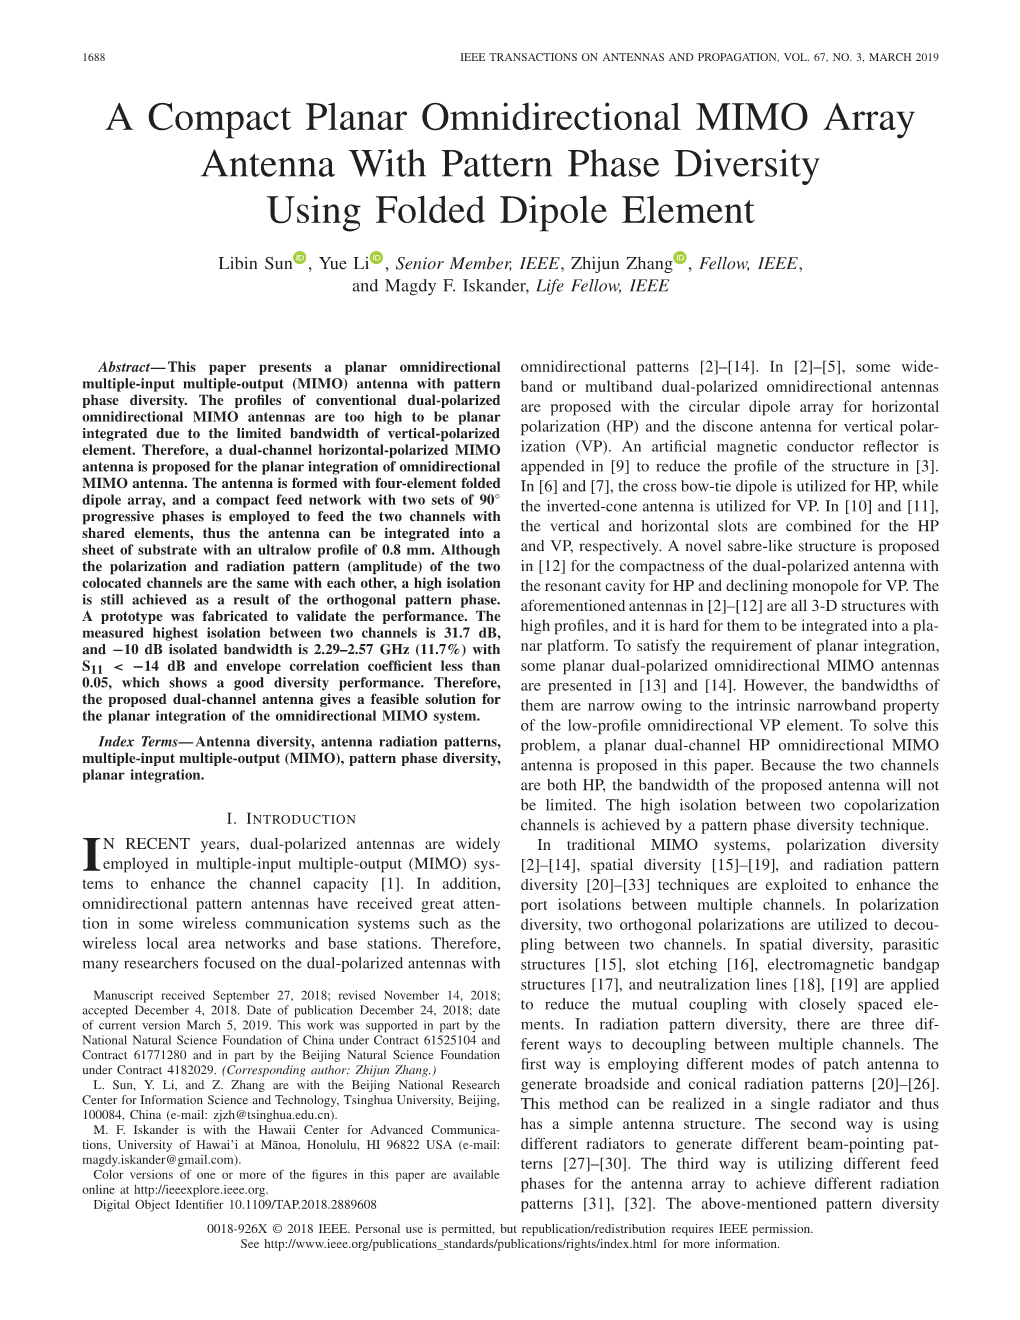 A Compact Planar Omnidirectional MIMO Array Antenna with Pattern Phase Diversity Using Folded Dipole Element